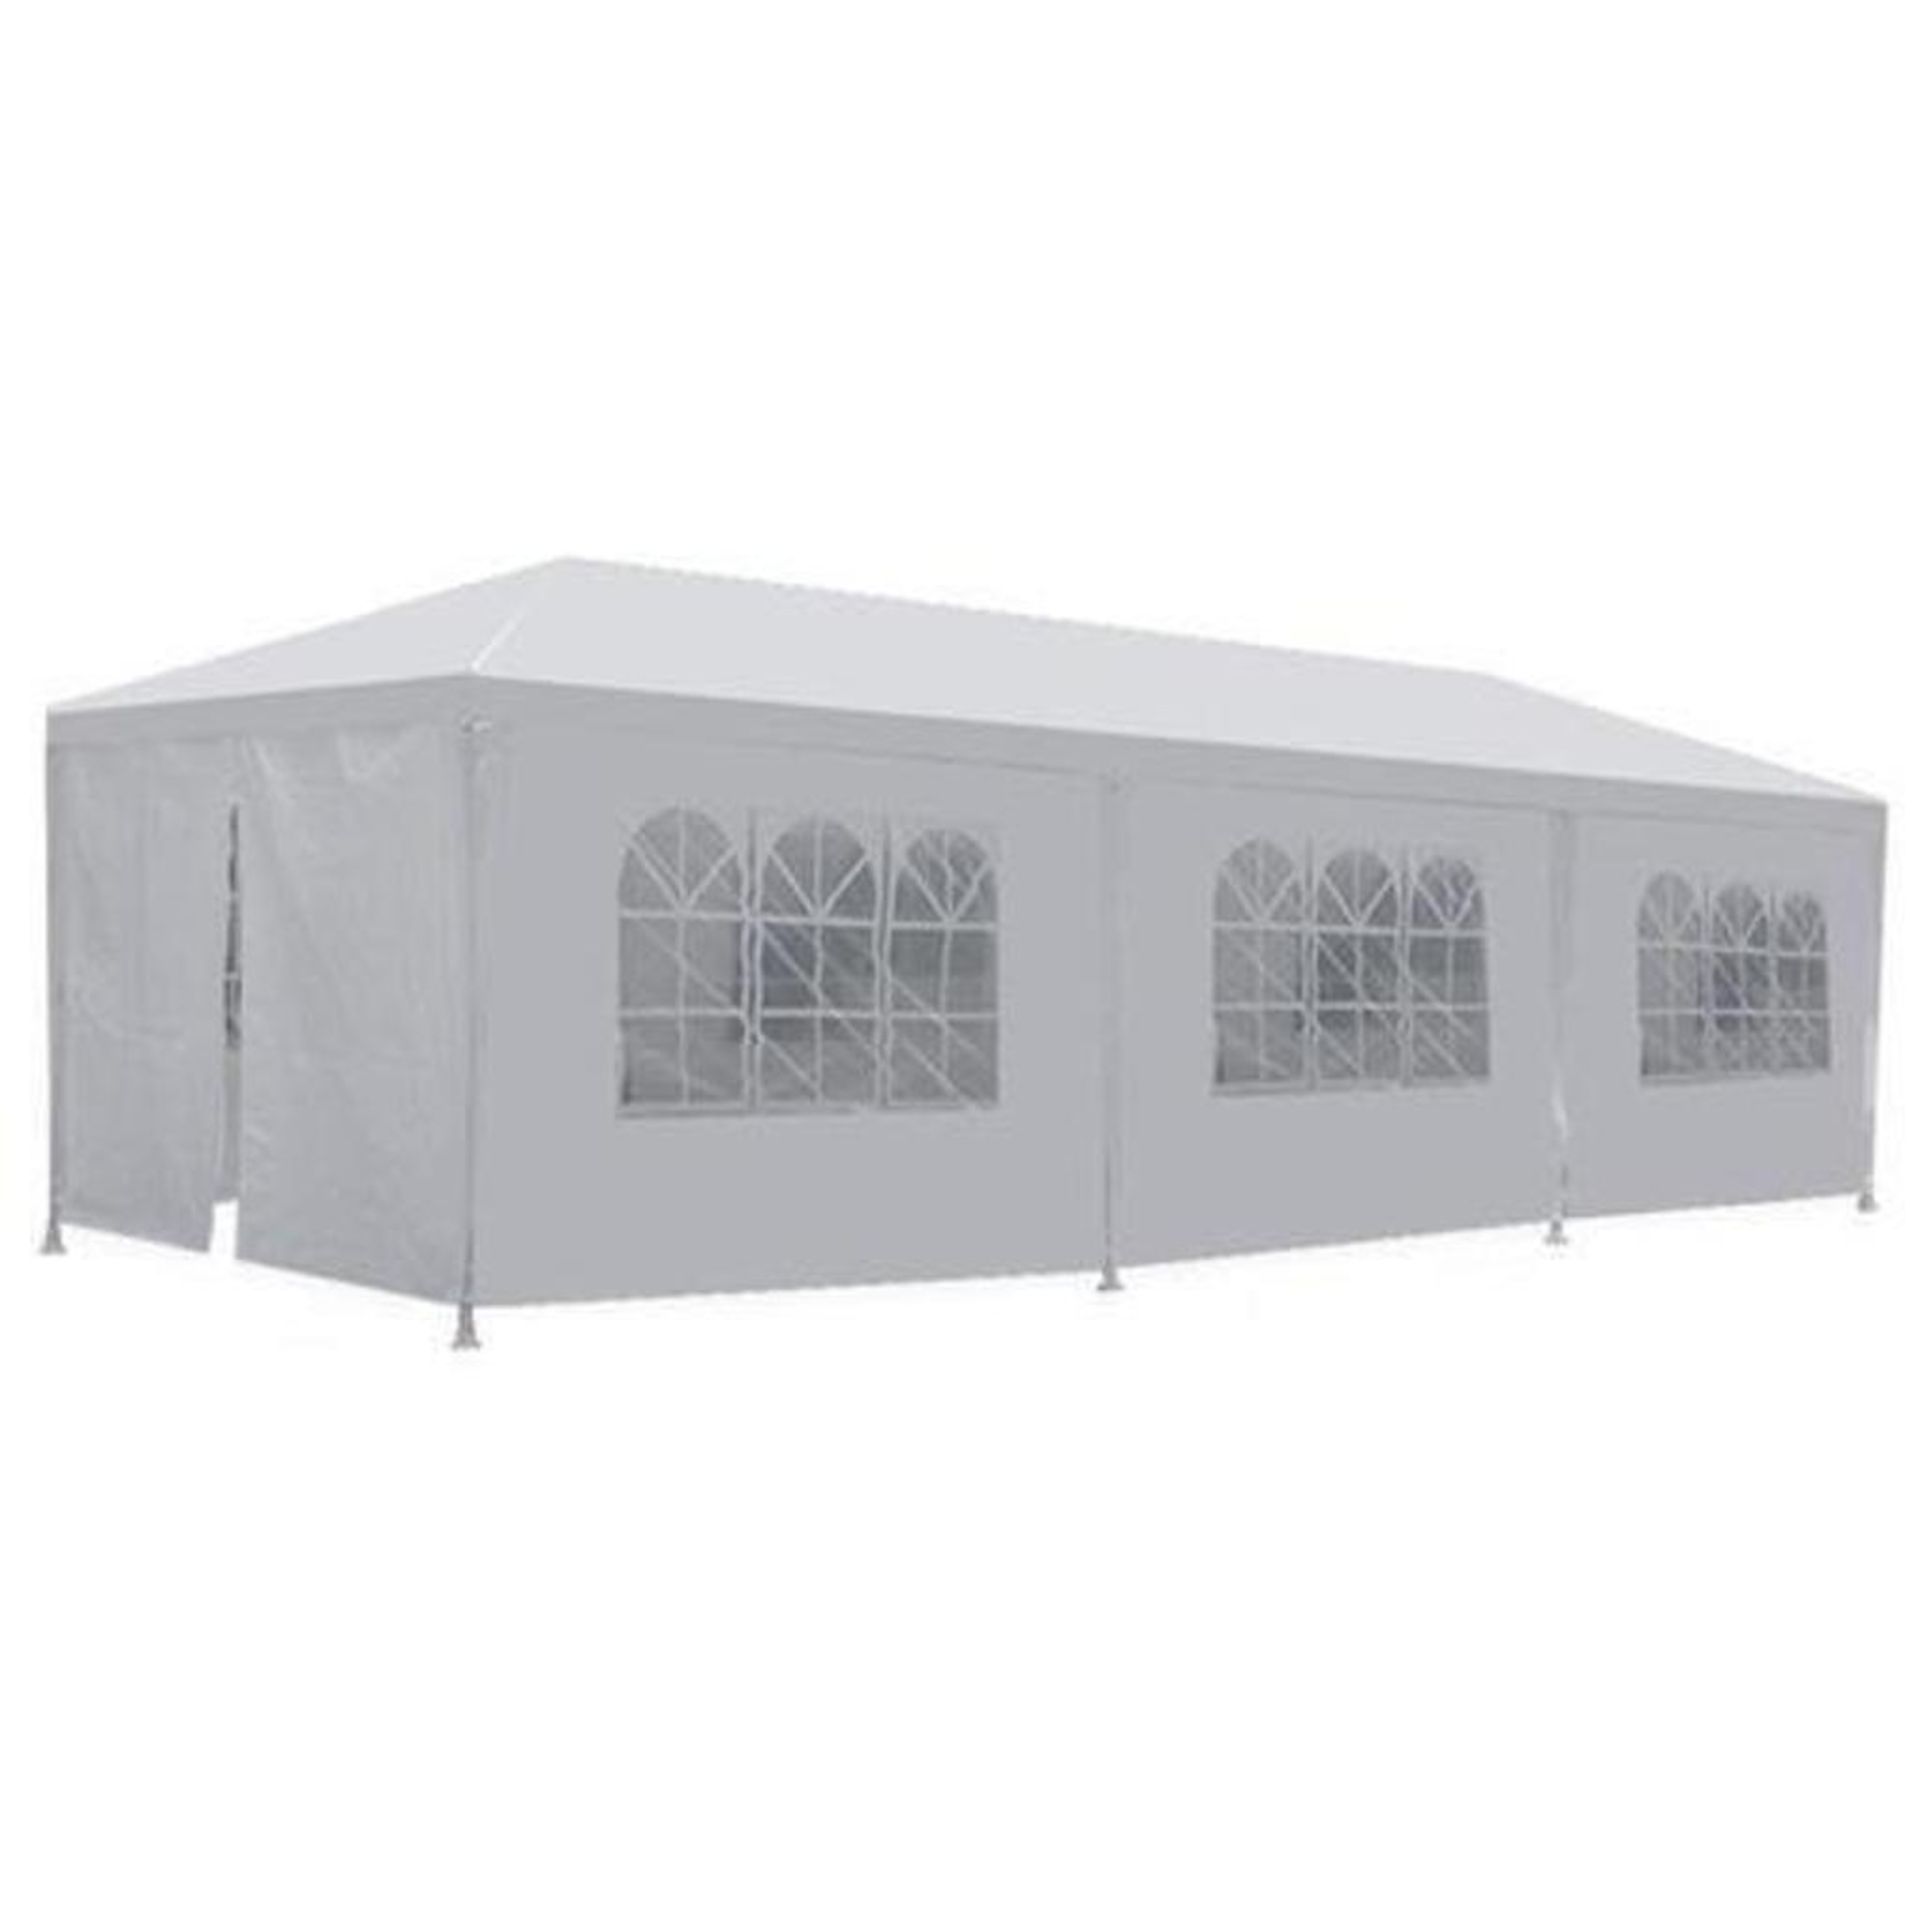 NEW 10' x 30' White Outdoor Party Tent M/N PT-1030-8-White